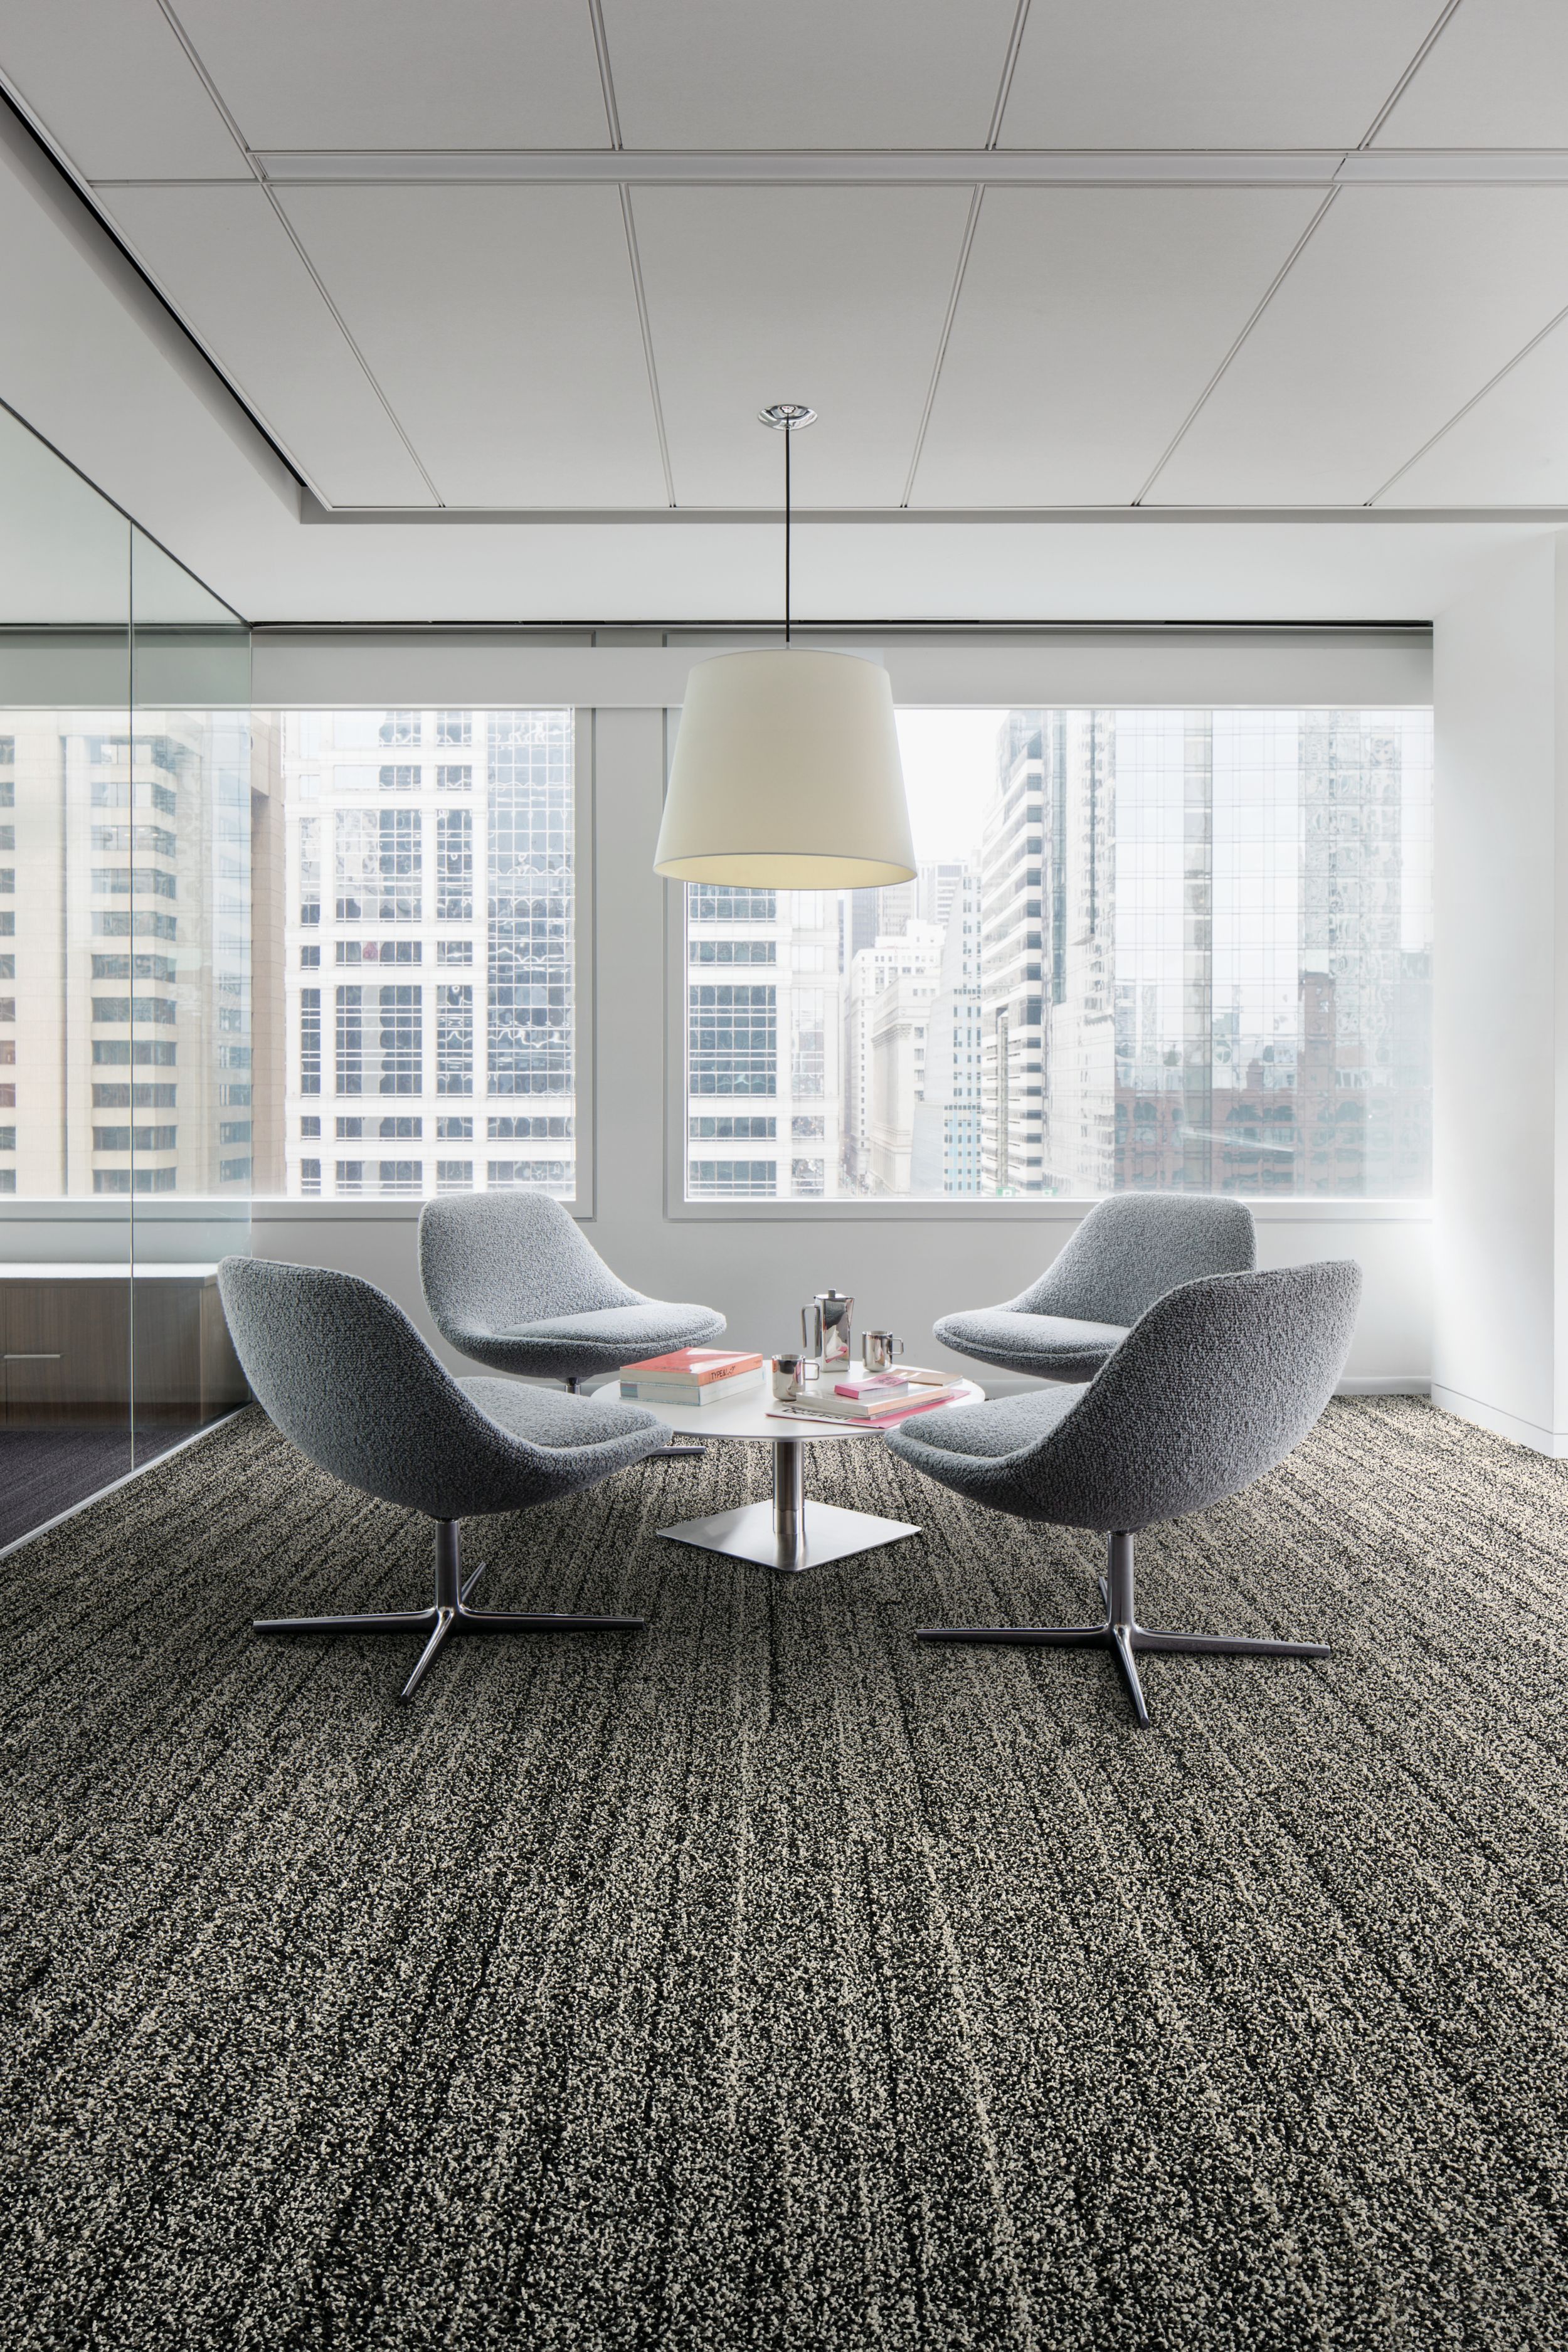 Interface Overedge plank carpet tile with fabric chairs around round table afbeeldingnummer 6